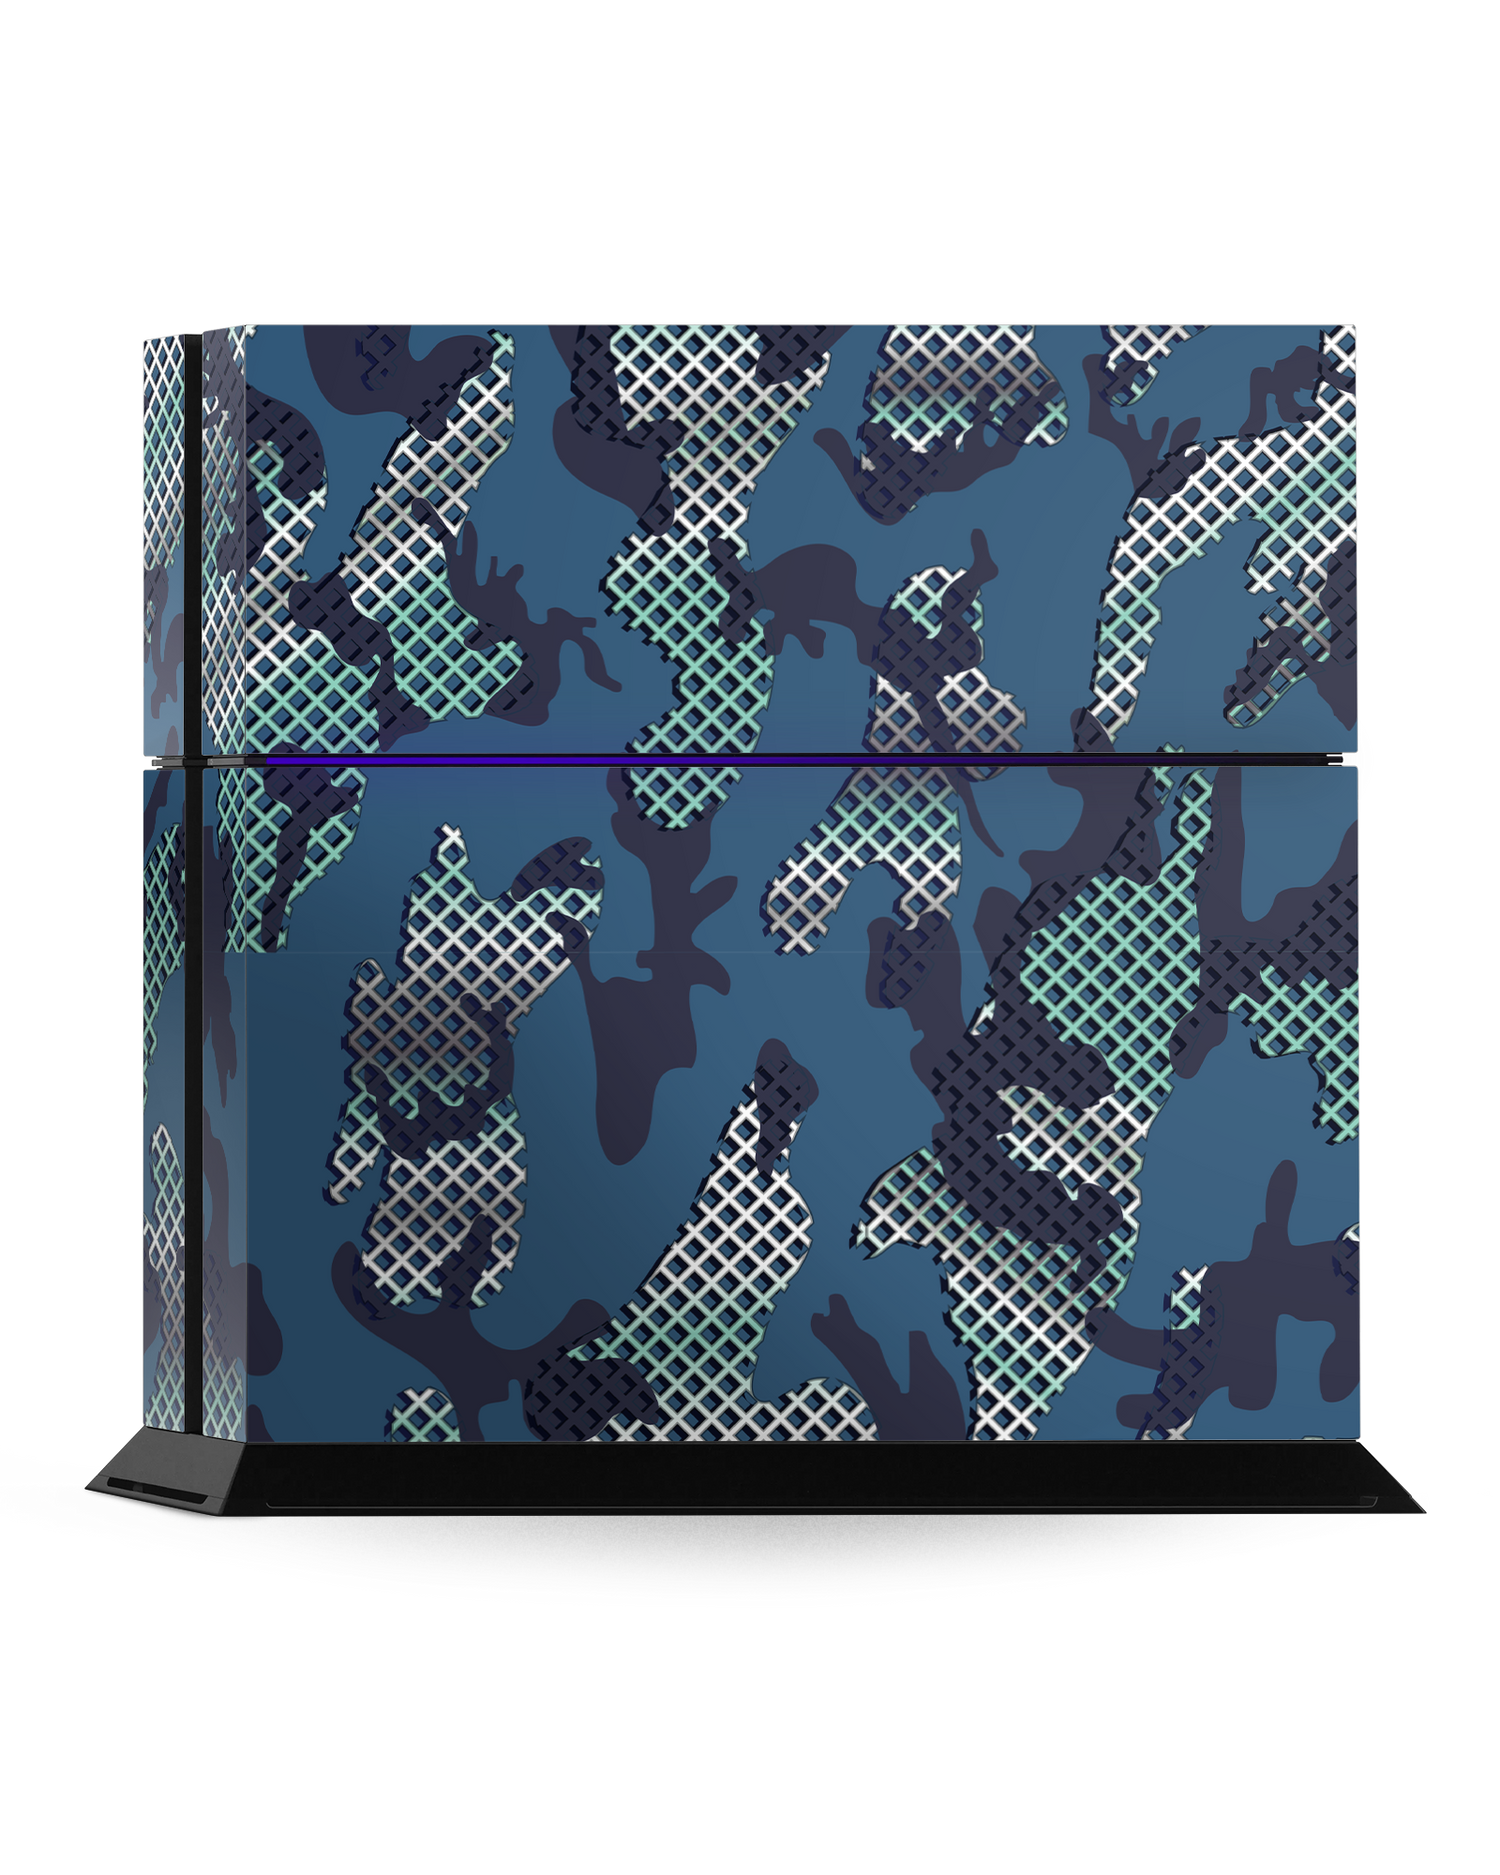 Fall Camo I Console Skin for Sony PlayStation 4: Standing